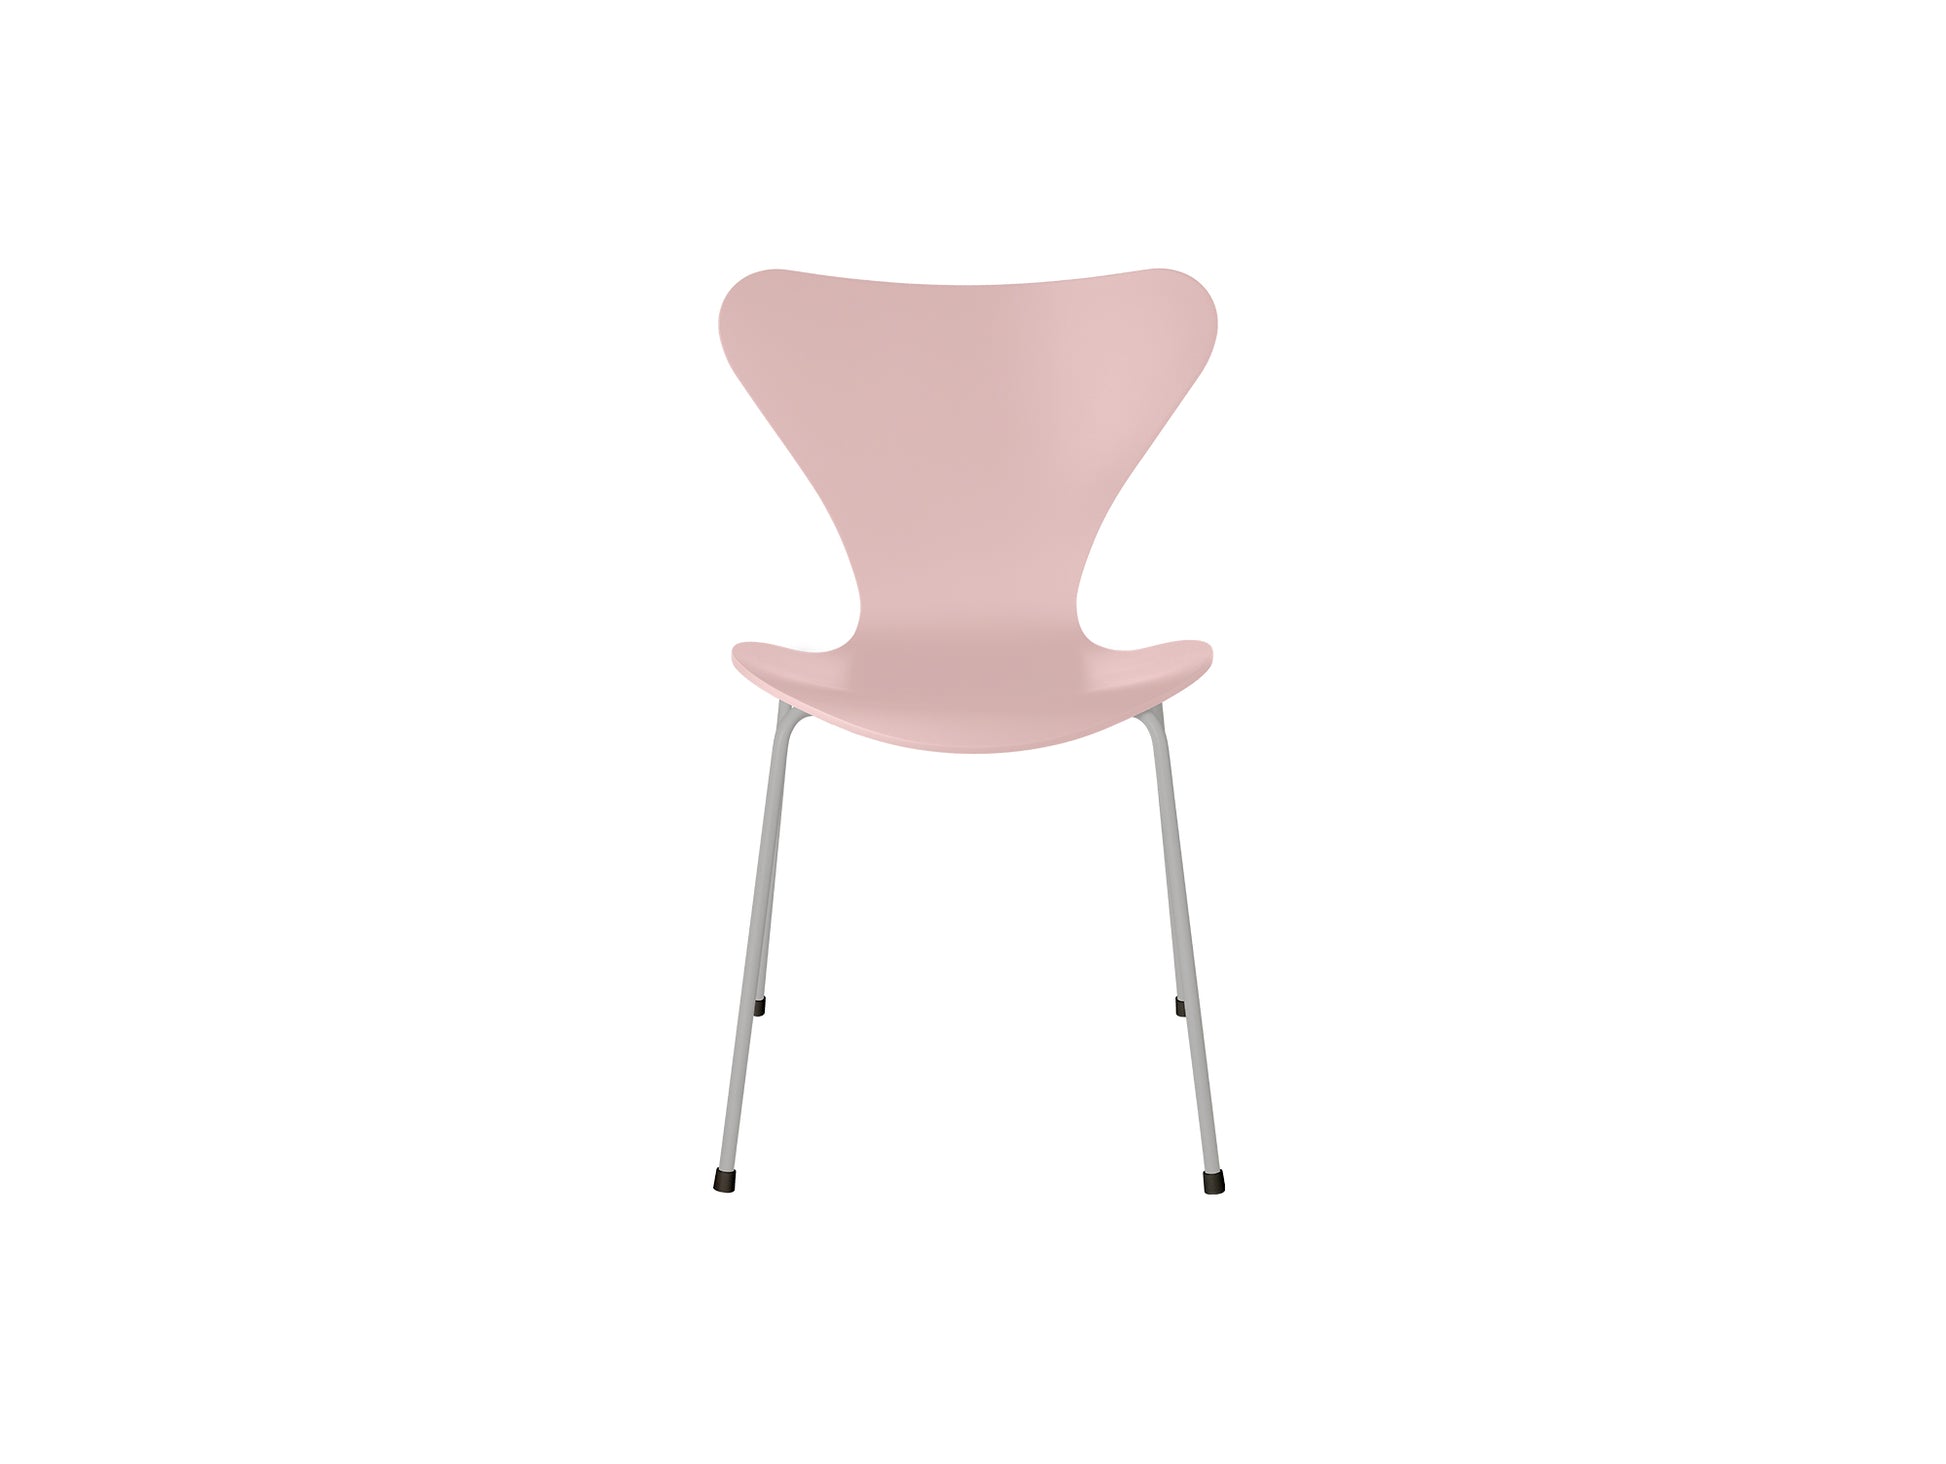 Series 7™ 3107 Dining Chair by Fritz Hansen - Pale Rose Lacquered Veneer Shell / Nine Grey Steel